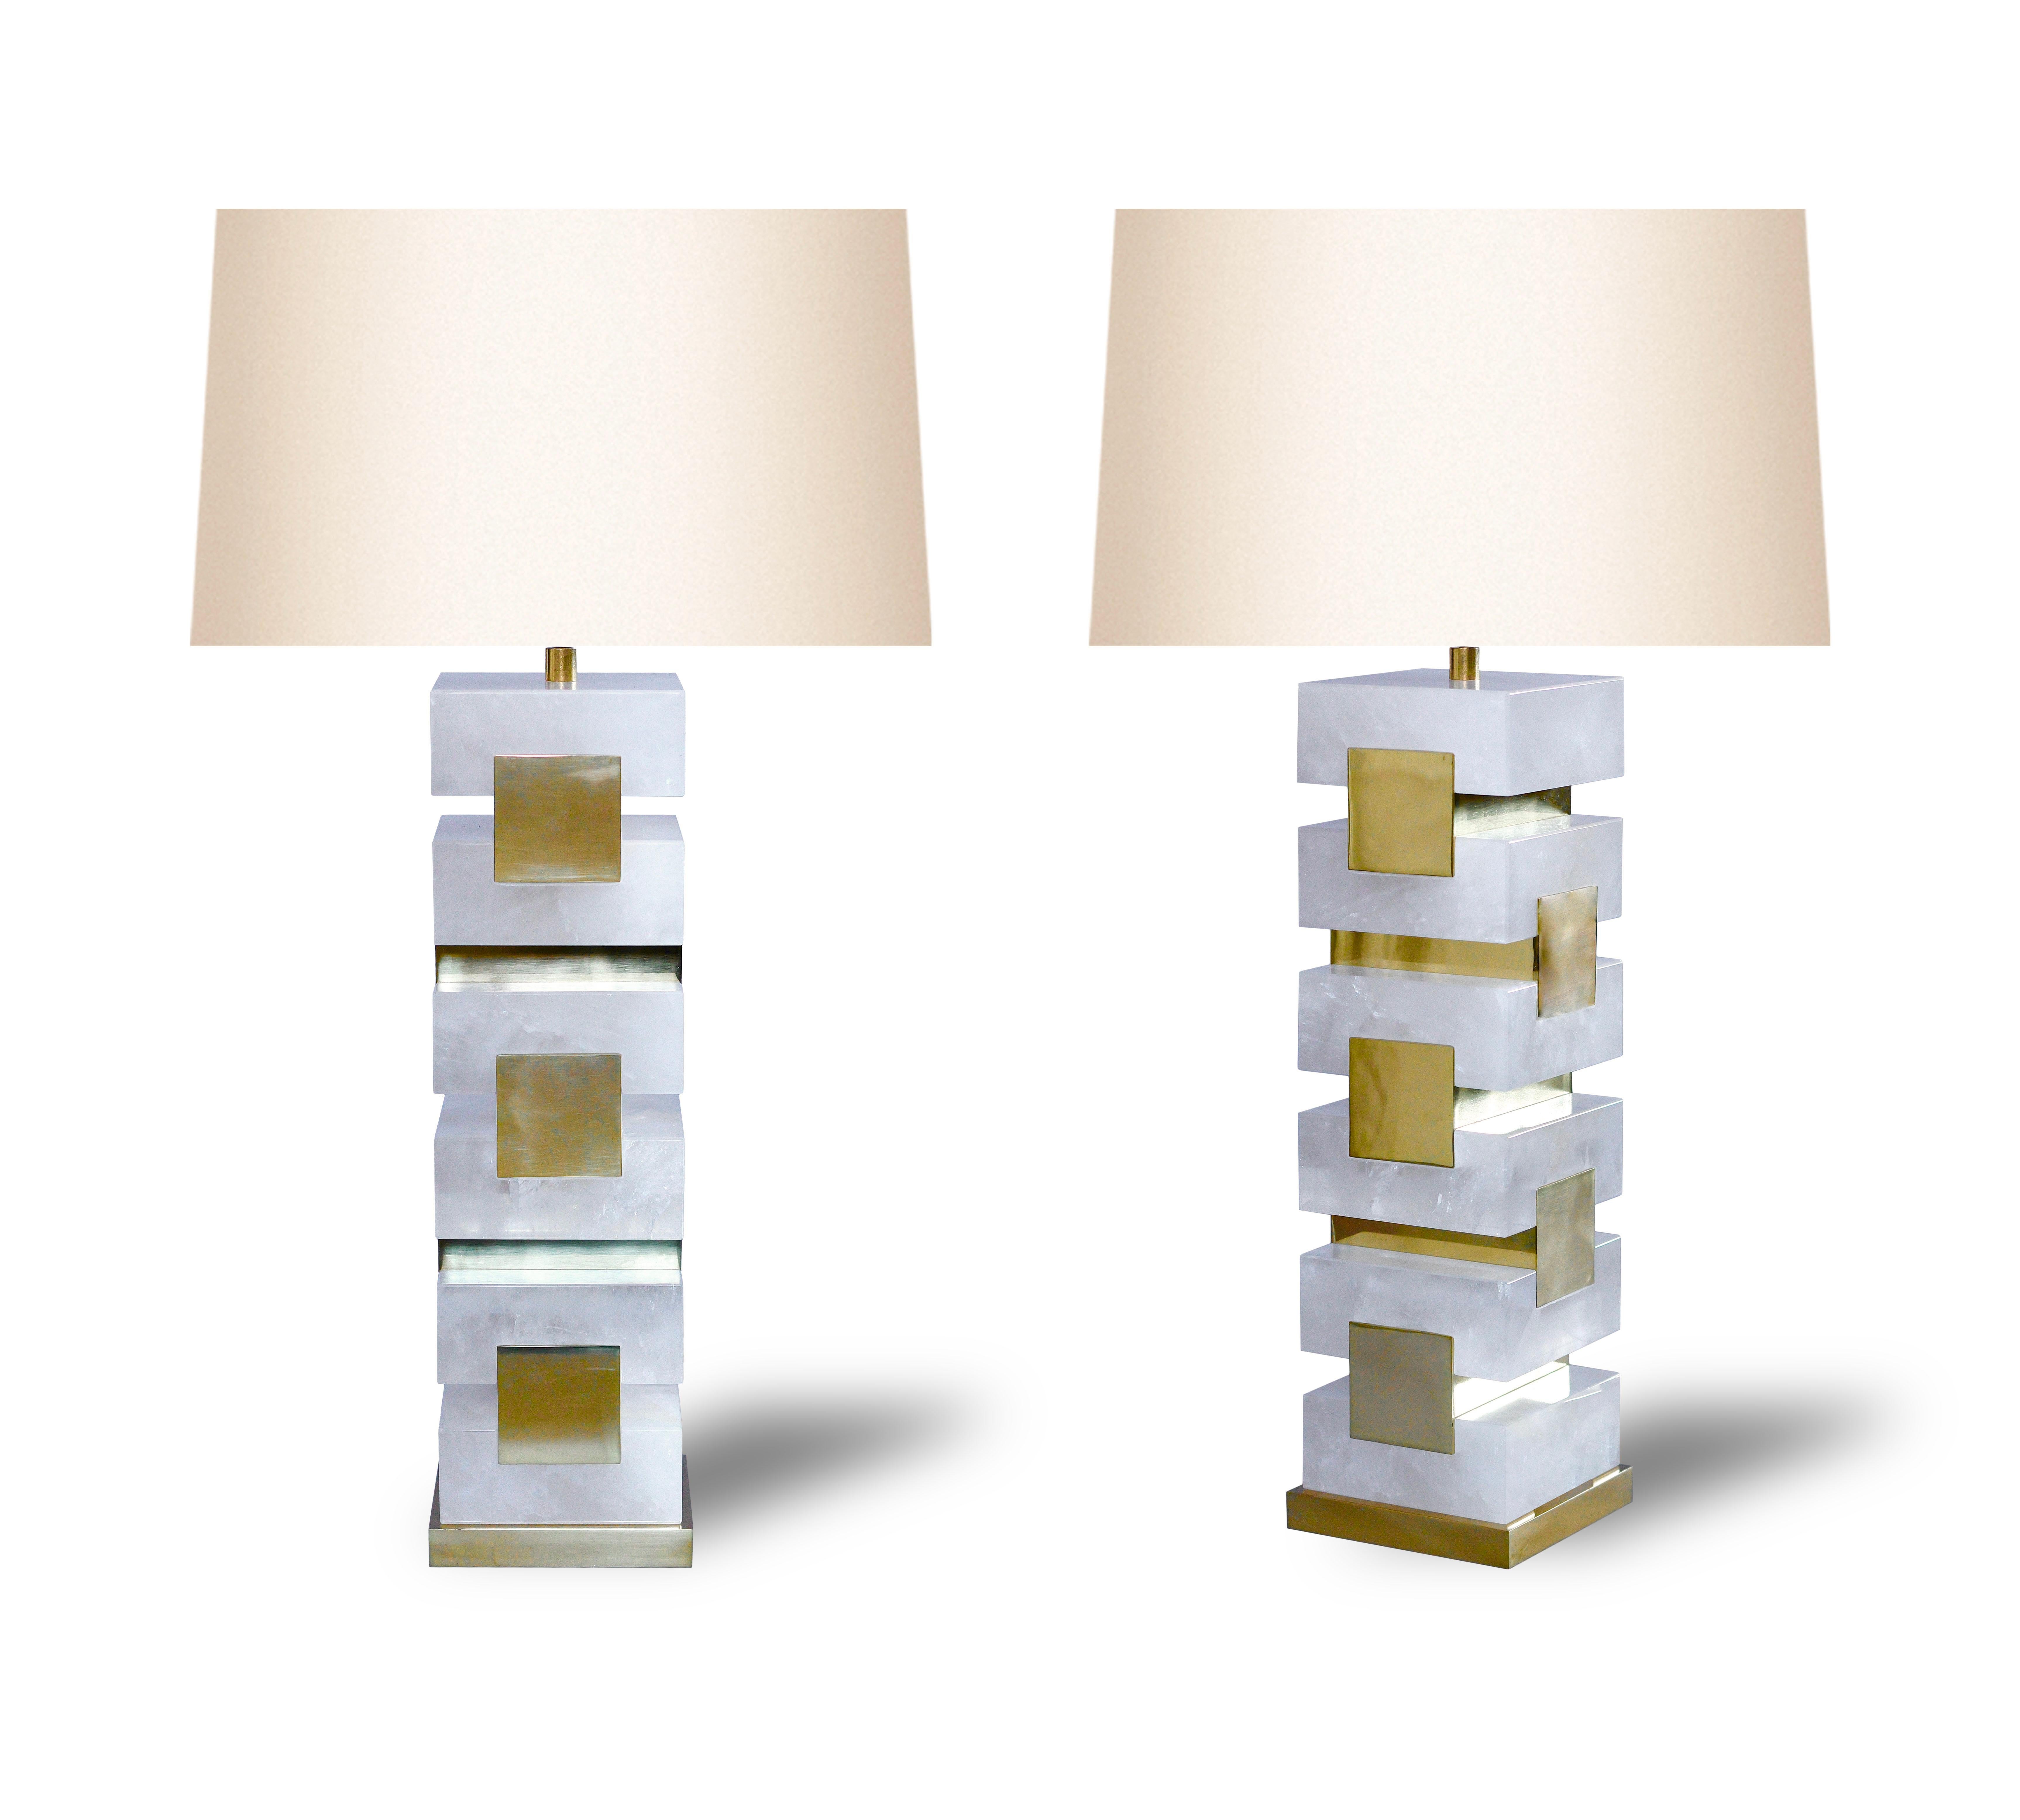 Pair of  rock crystal lamps with polish brass inserts decorations.

to the top of the rock crystal 15 inch.

Lamp shades are not included.

Created by Phoenix 

Custom metal finish upon request.